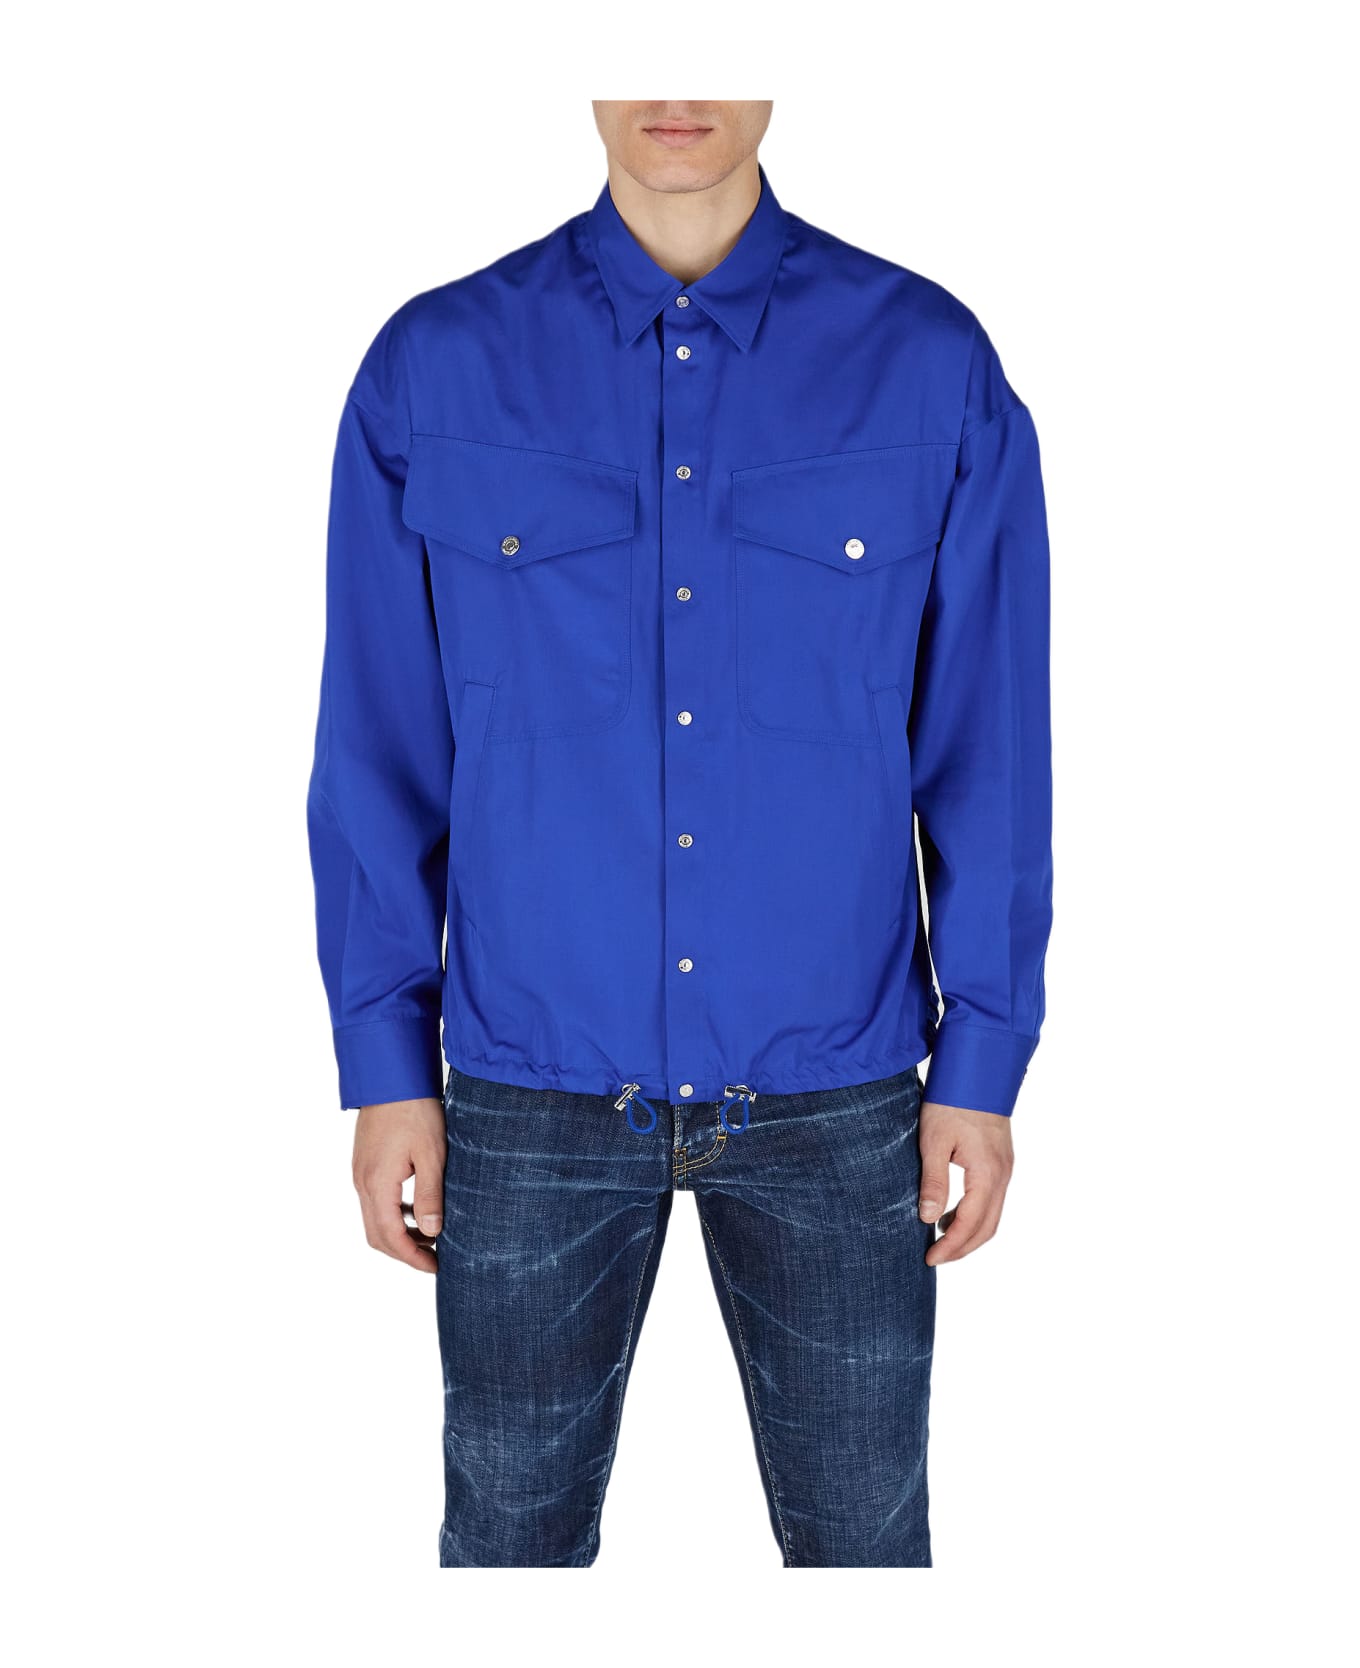 Dsquared2 Shirts - Ink blue